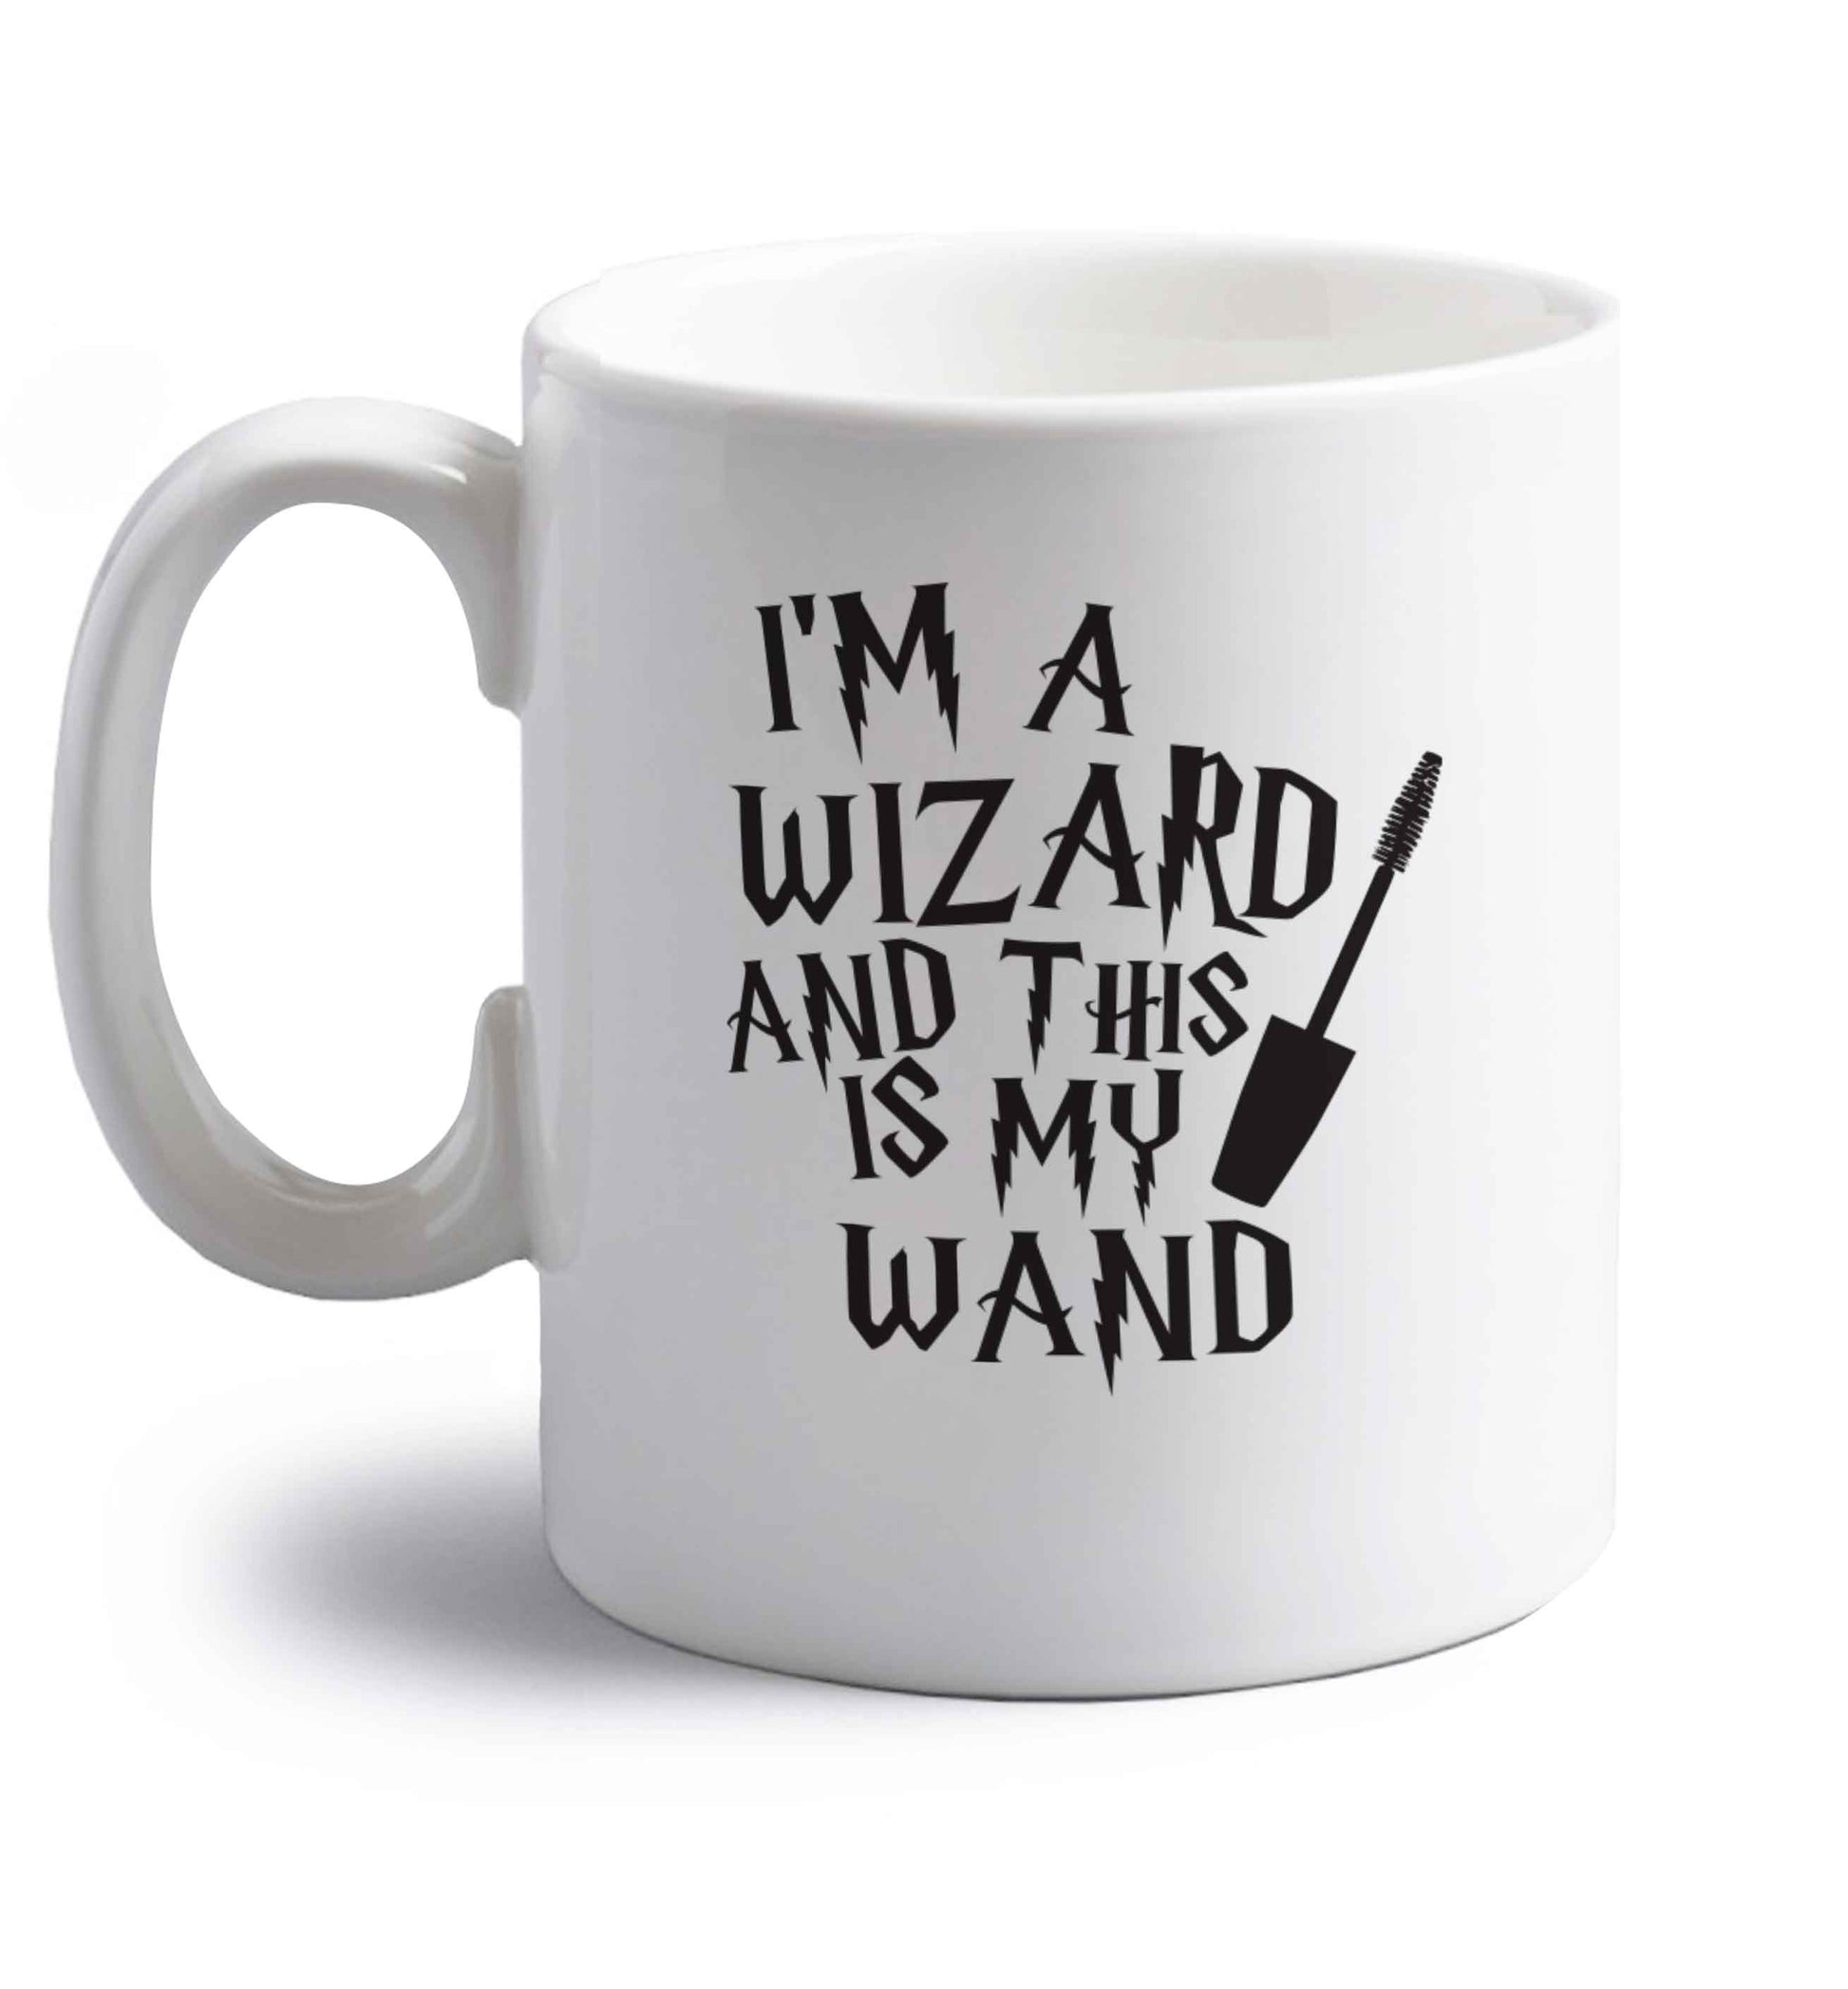 I'm a wizard and this is my wand right handed white ceramic mug 